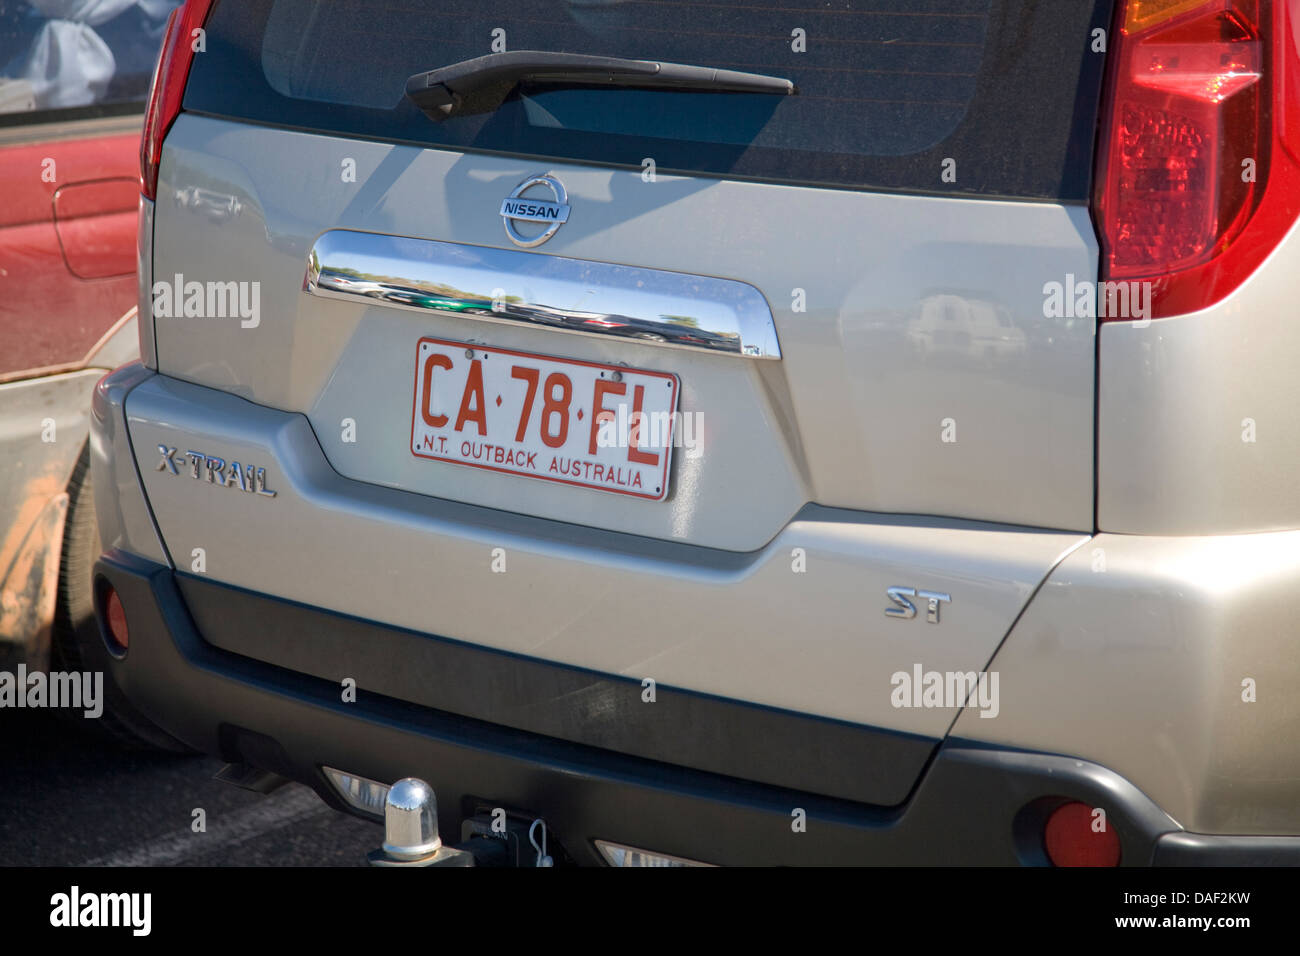 australian number plate on the rear of a vehicle in darwin,number plate is NT outback Stock Photo